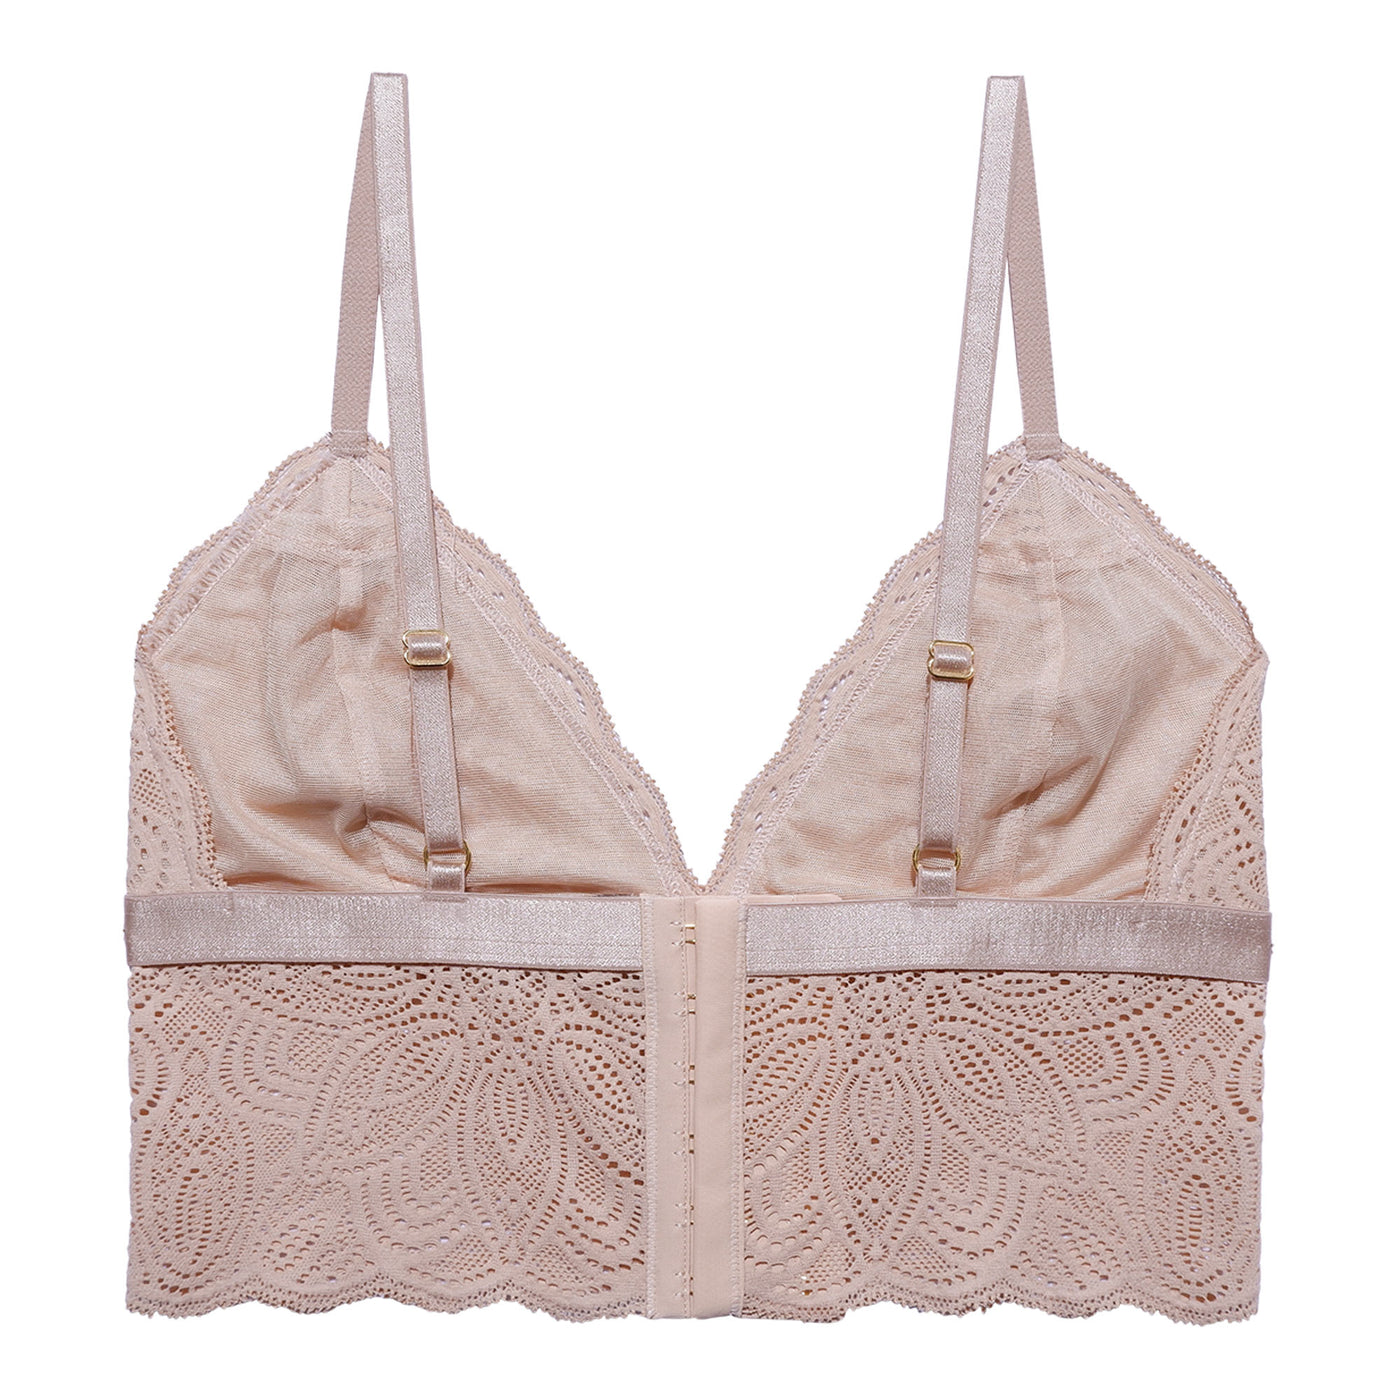 Our Luna Bralette is comfortable and easy to style for any occasion. Made in an elegant lace with delicate scalloped edges and beige mesh lining, it is modern and romantic. Its long line fit